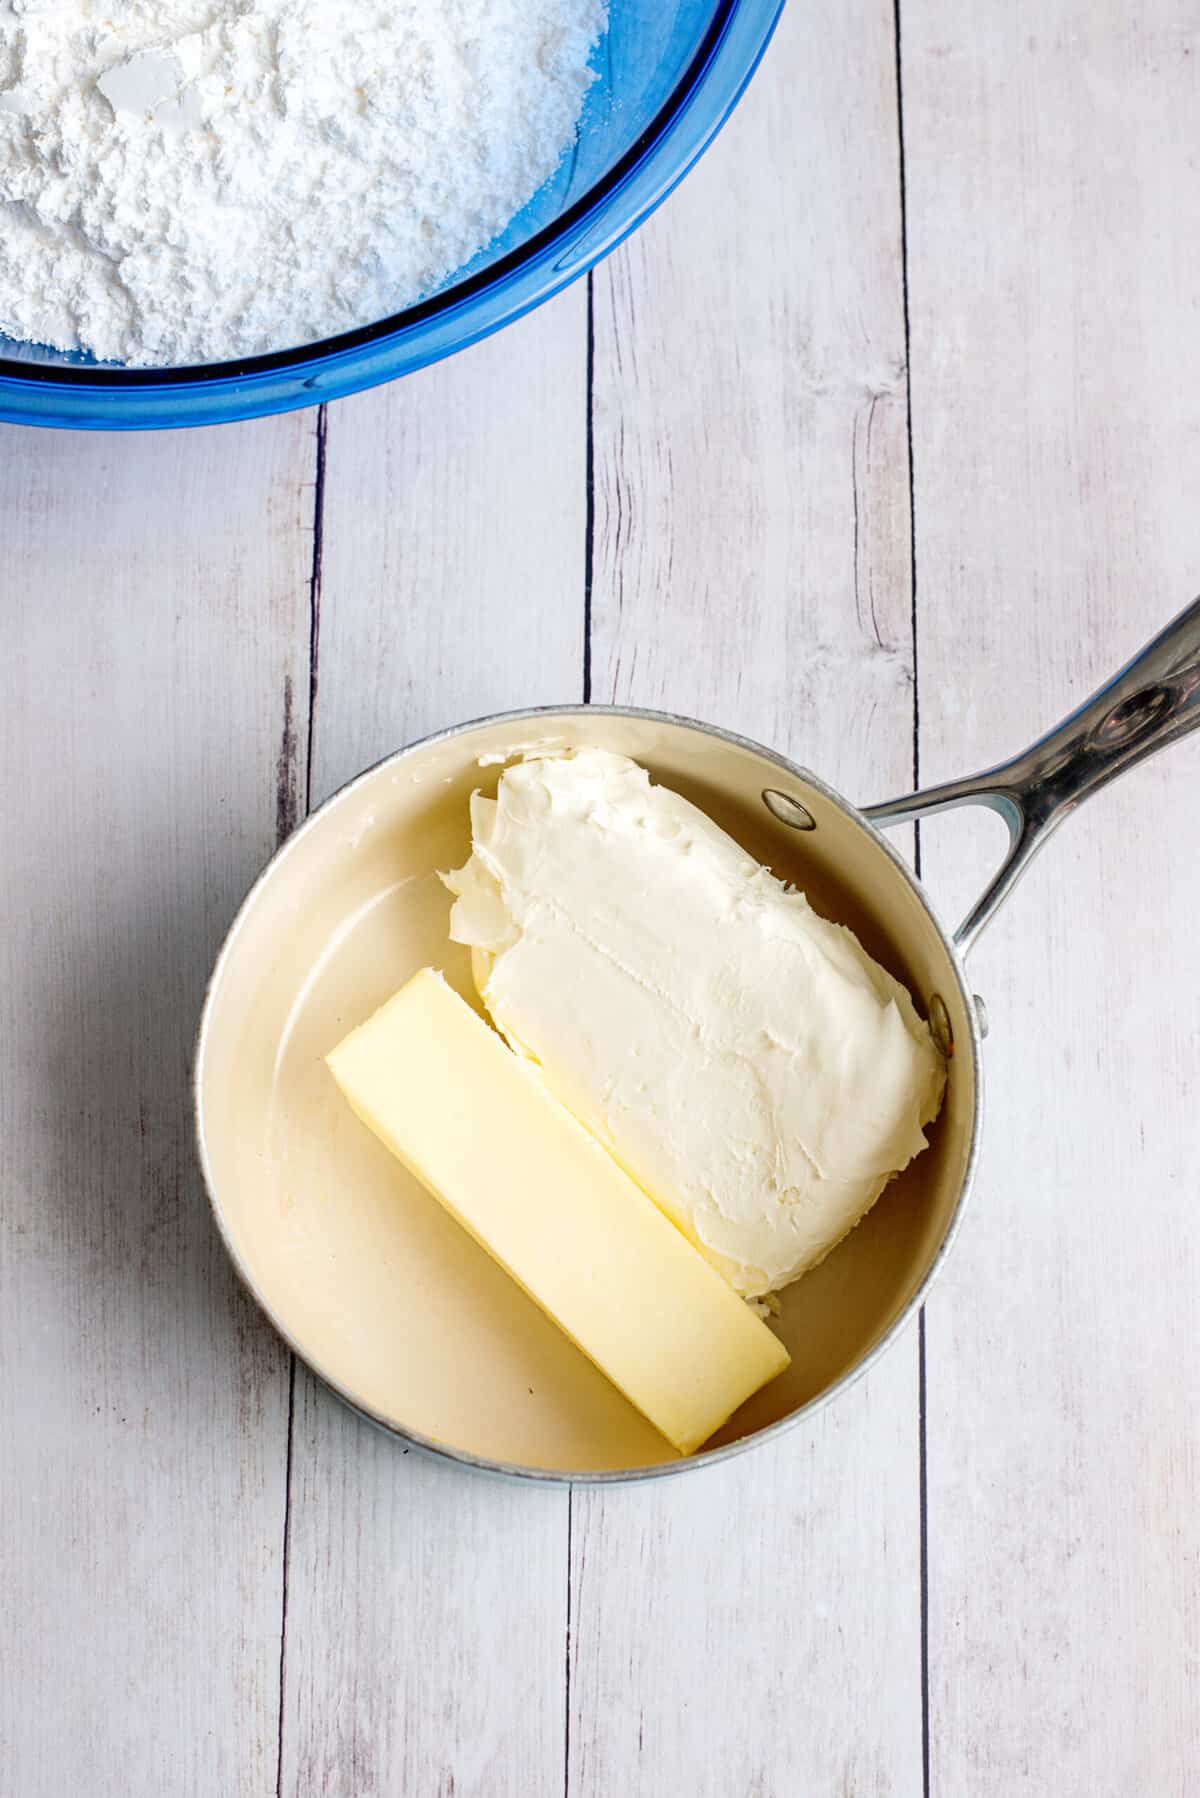 melt butter and cream cheese in a small saucepan